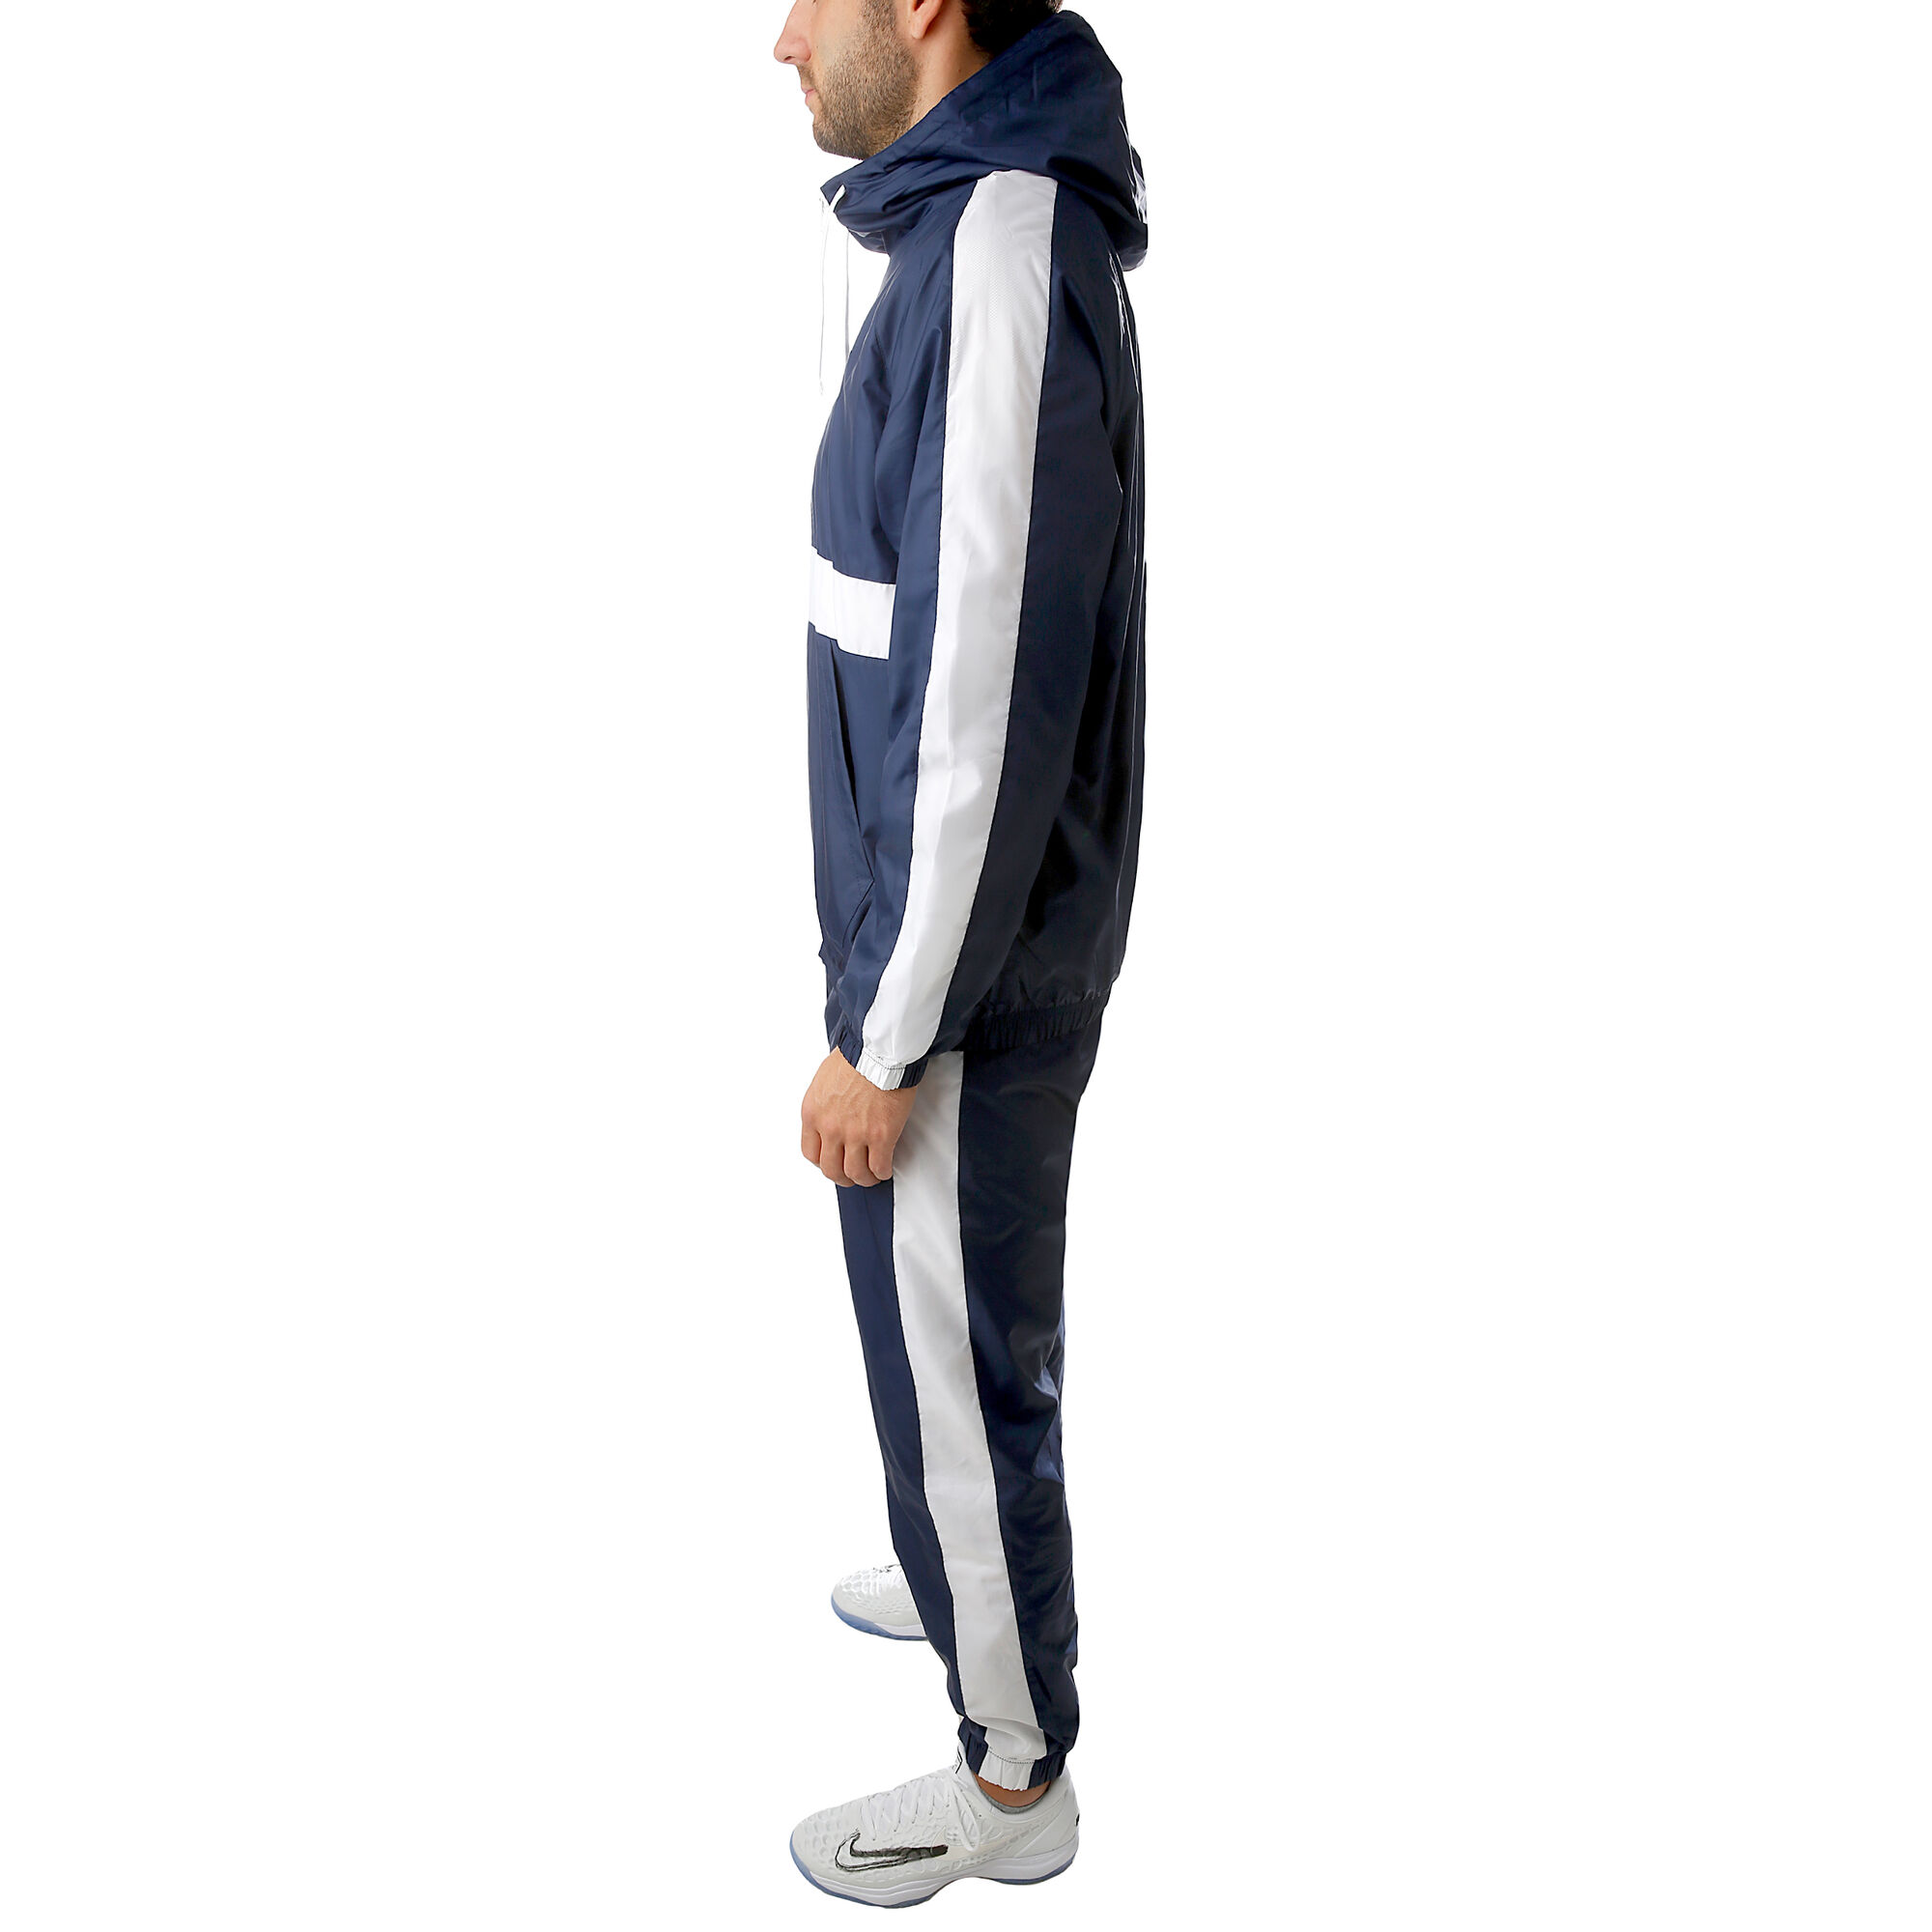 Nike Sportswear Woven Hooded Hombres Azul Oscuro, Blanco compra online | Tennis-Point